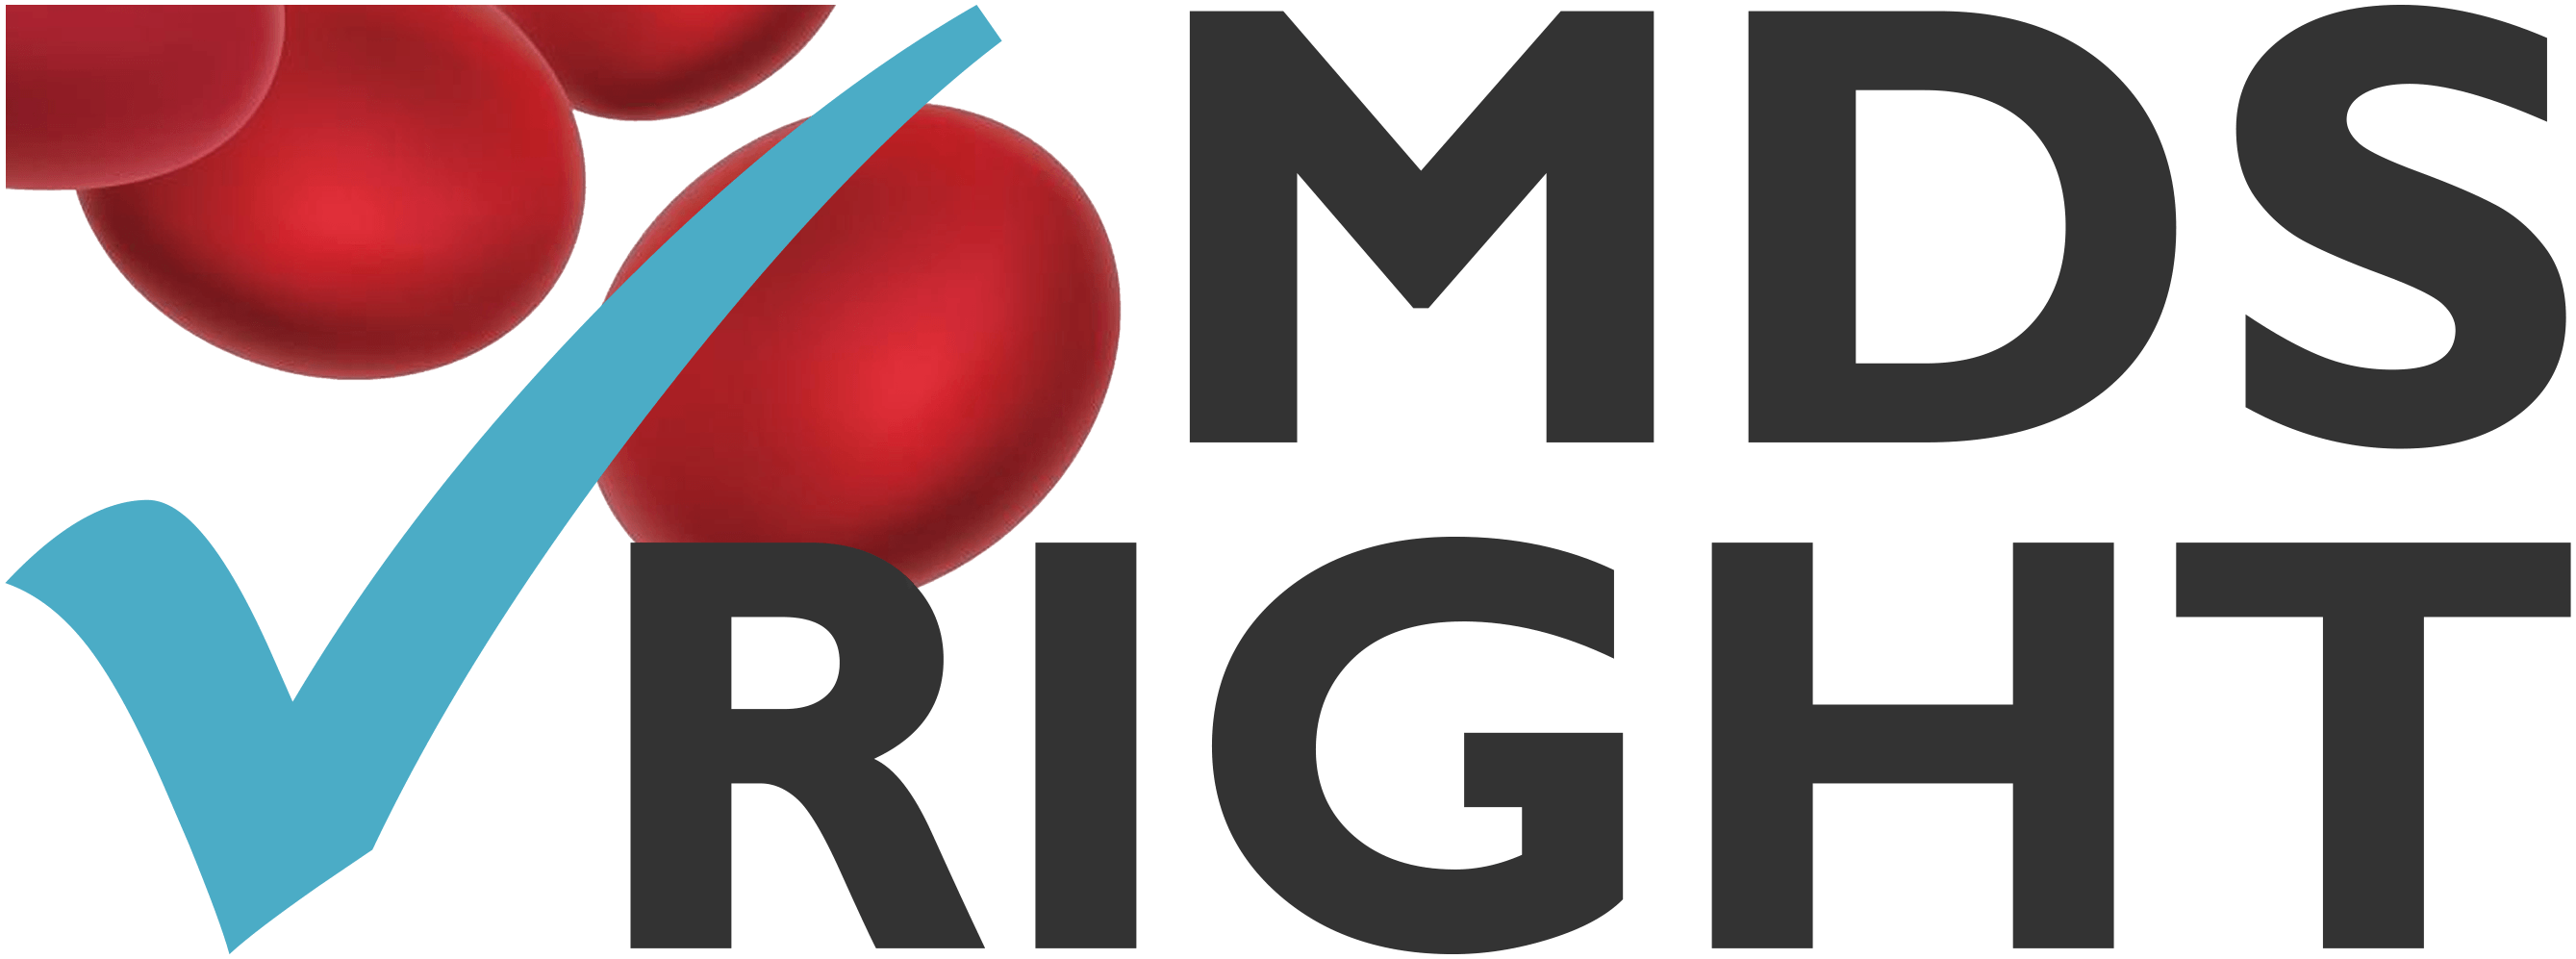 Right Logo - mds-right-logo-large - MDS UK Patient Support Group